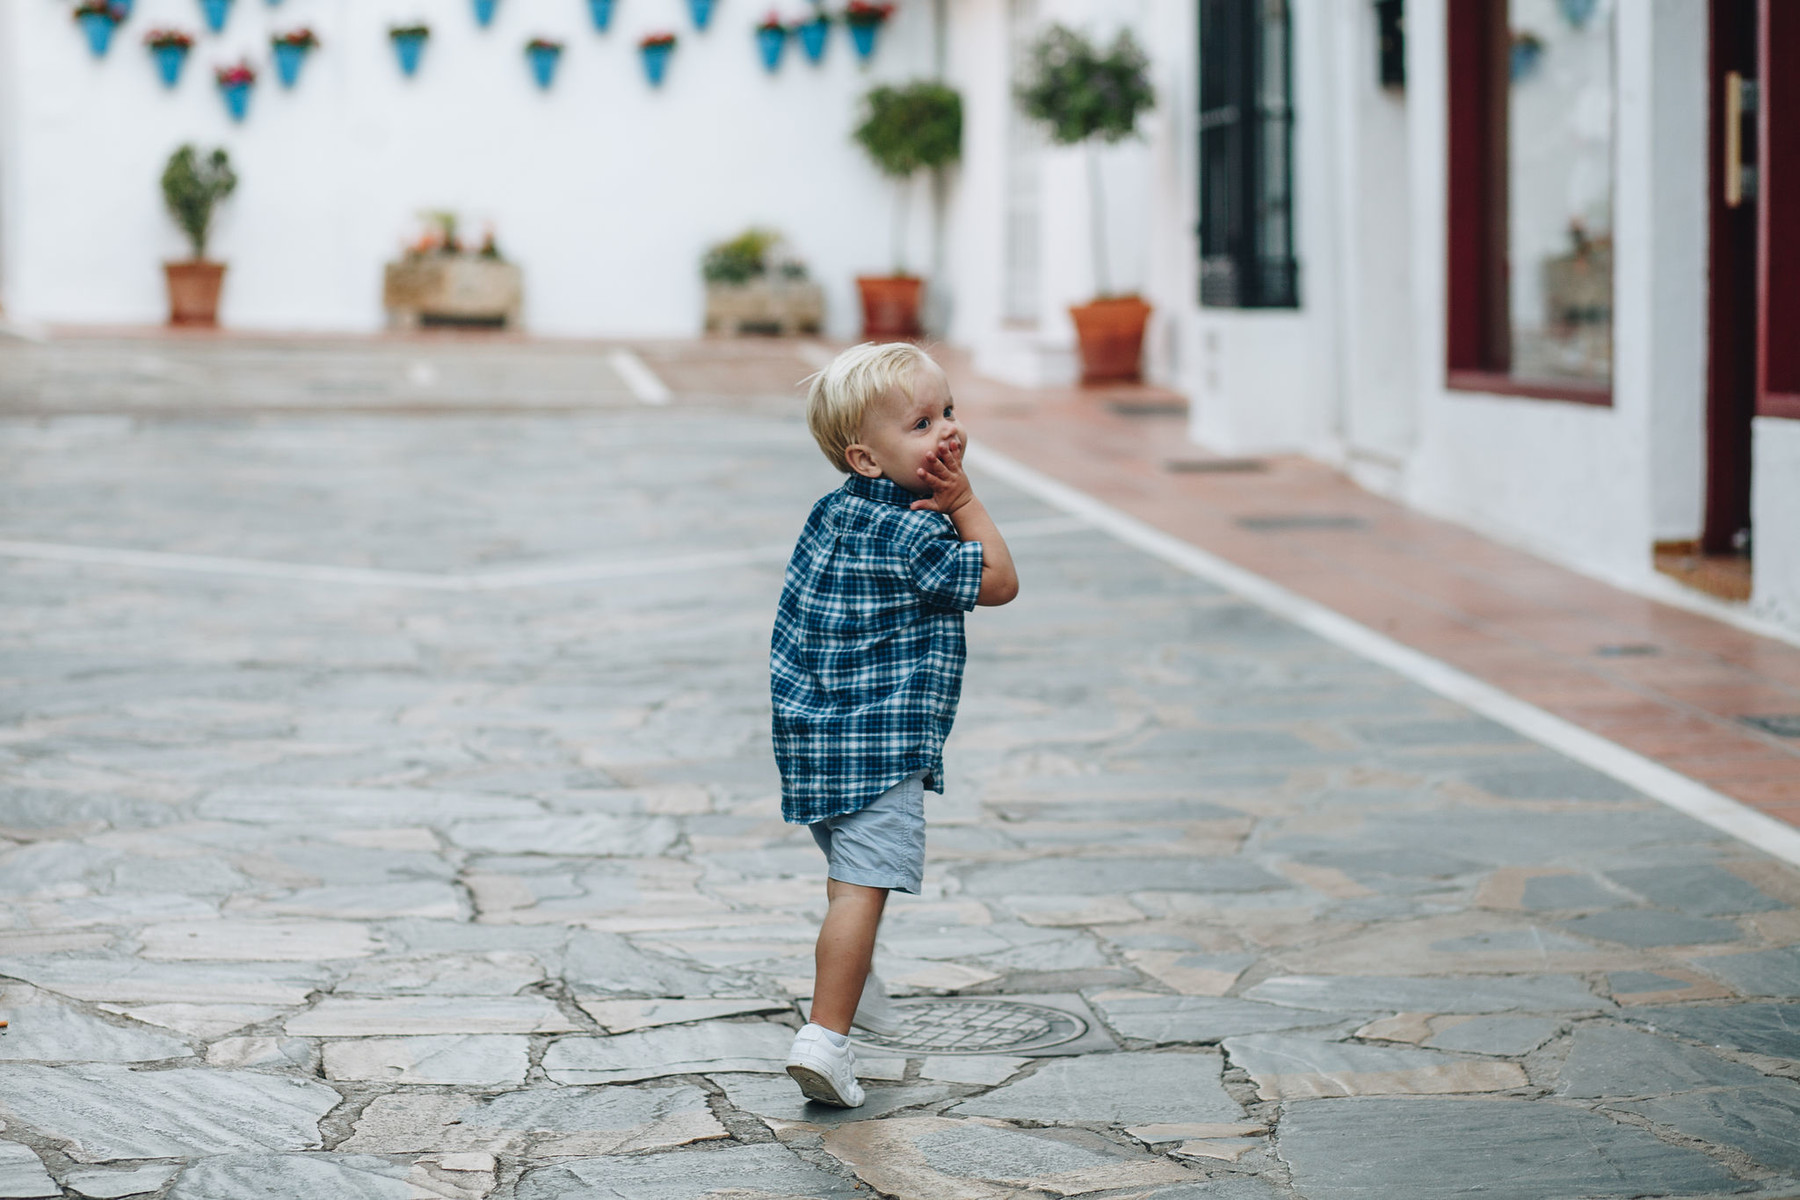 Family photography in the Center of Marbella